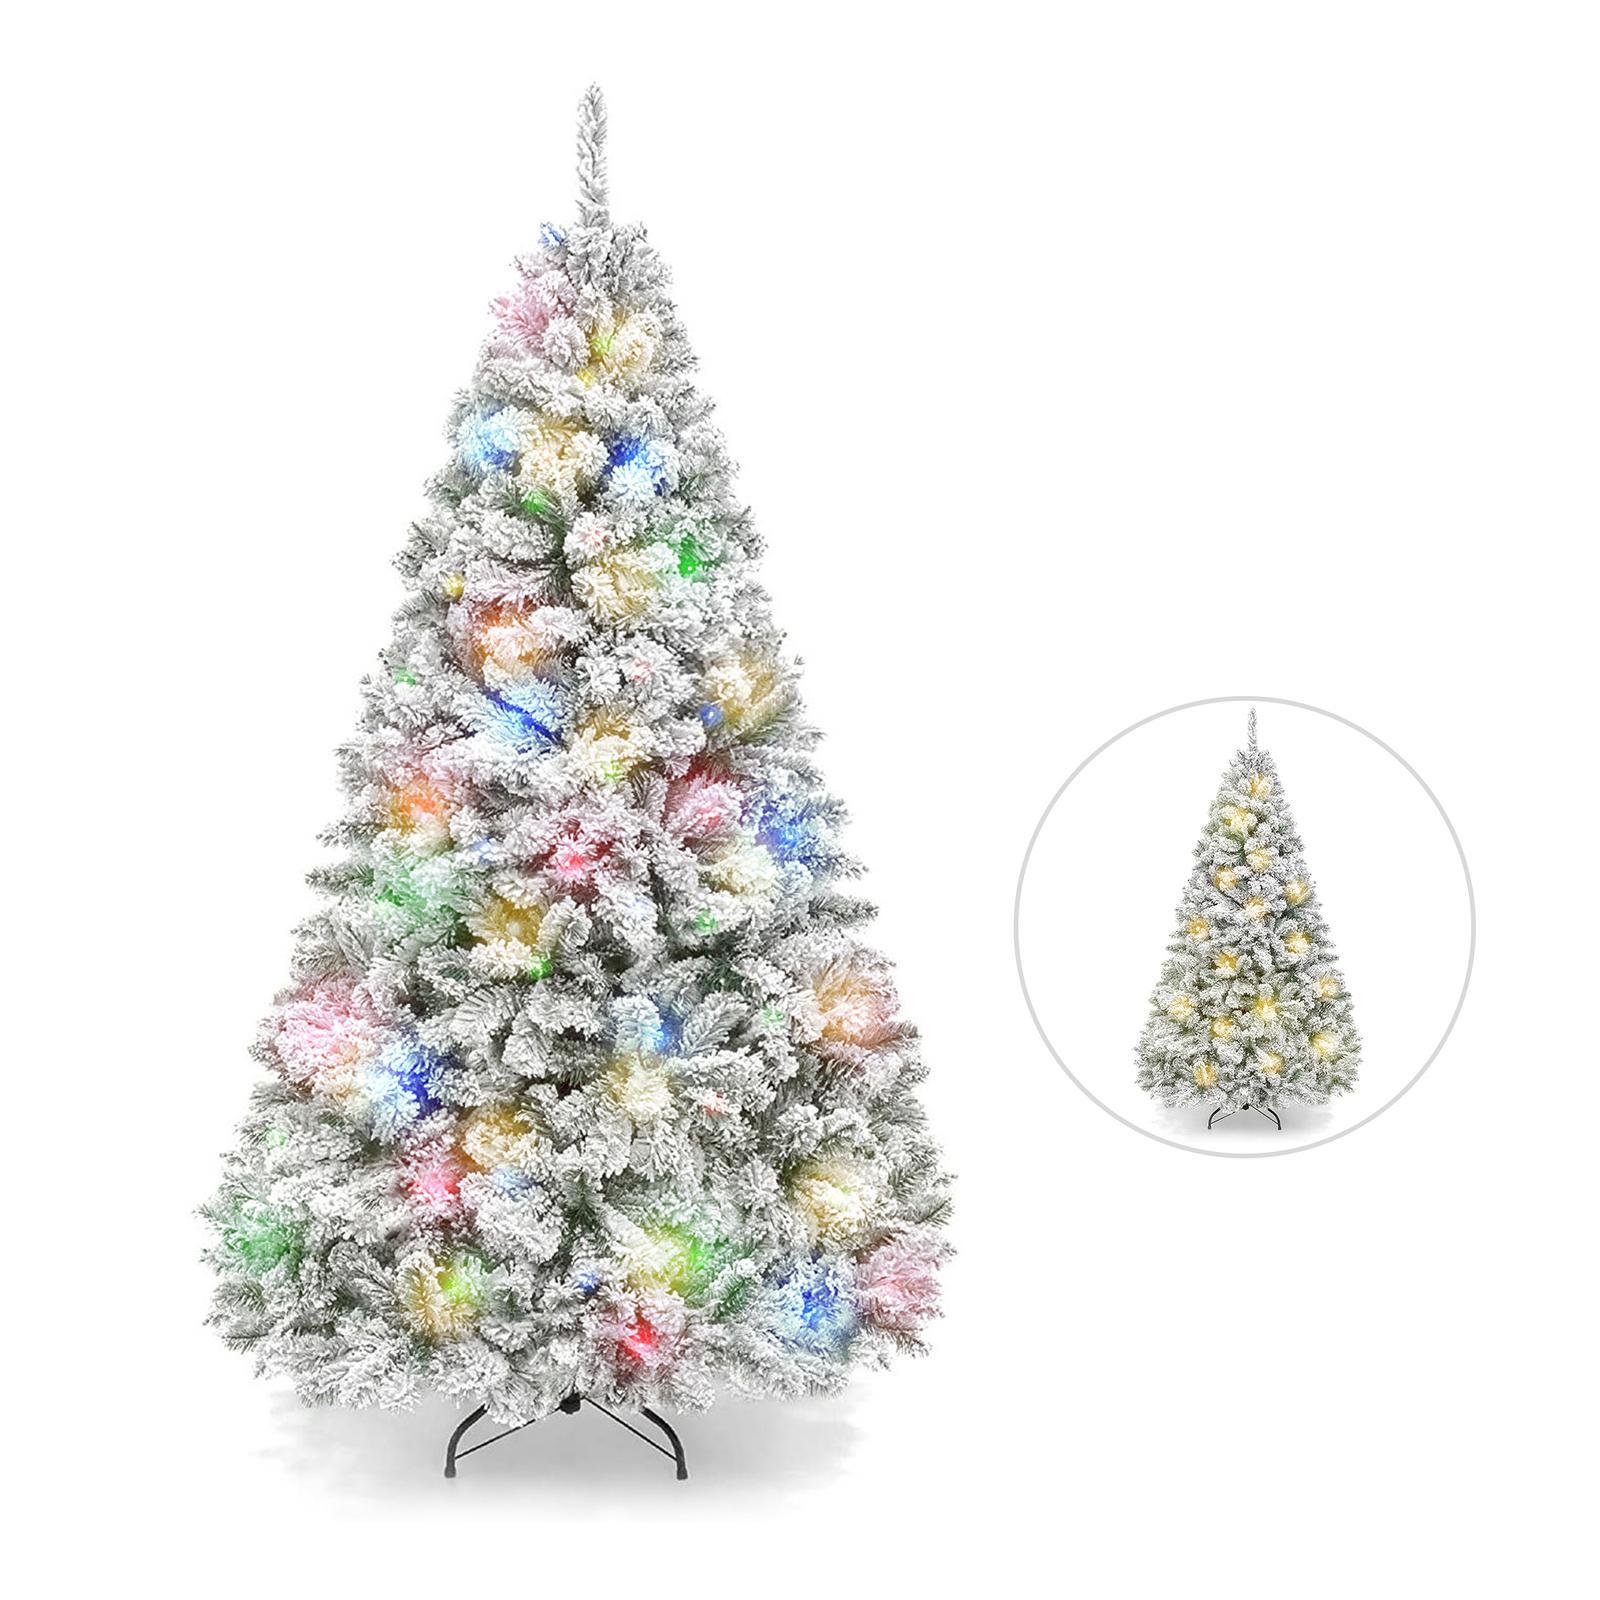 Festiva Christmas Tree With LED 2.1m Snow Flocked White Xmas Trees Artificial Decorations